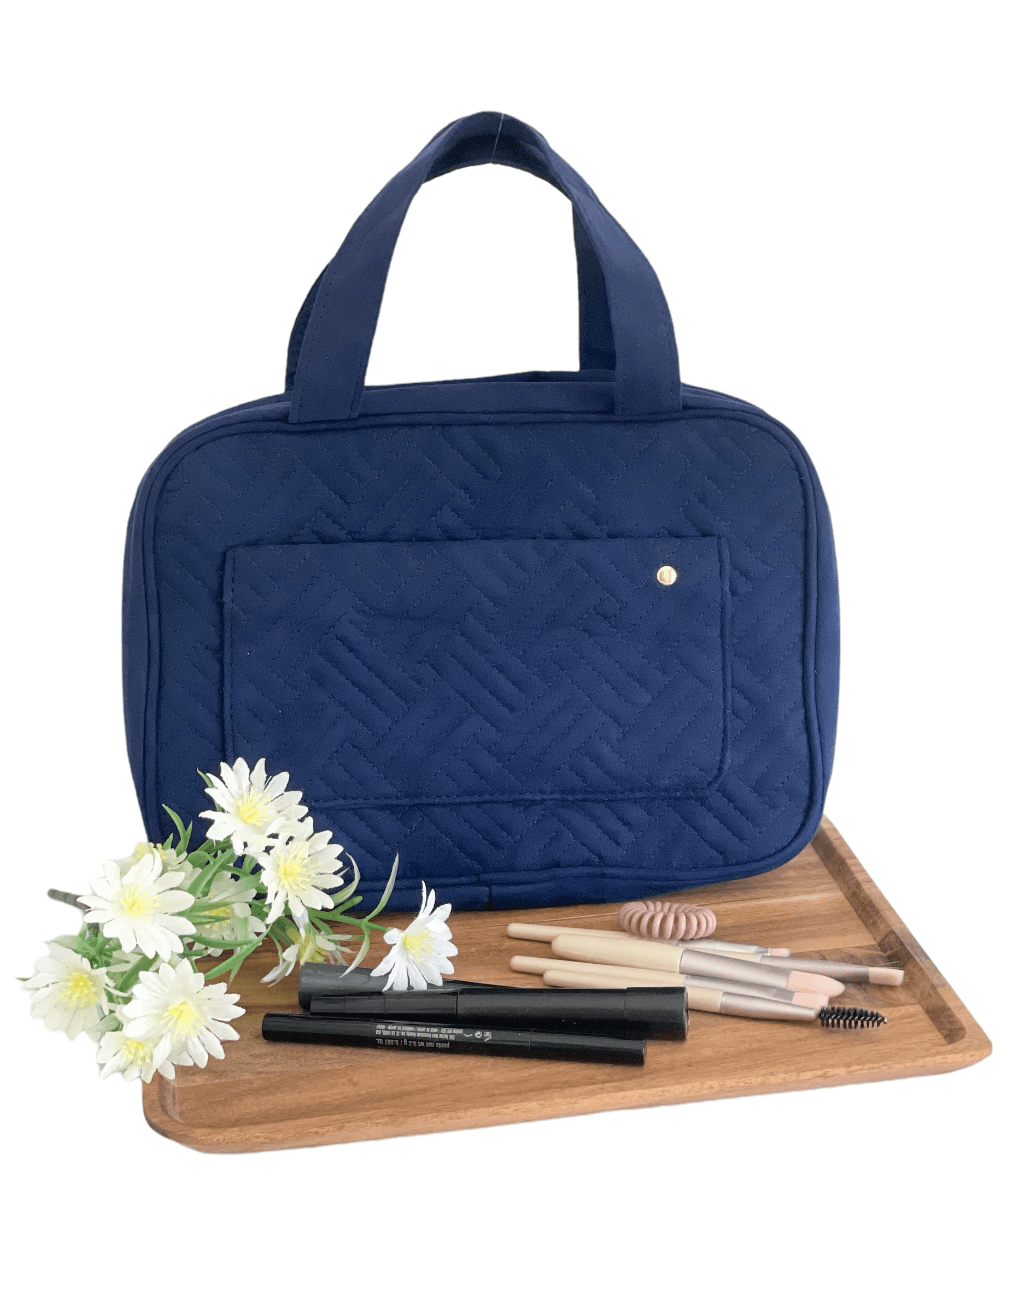 Quilted Travel Cosmetic Bag - Cocalily